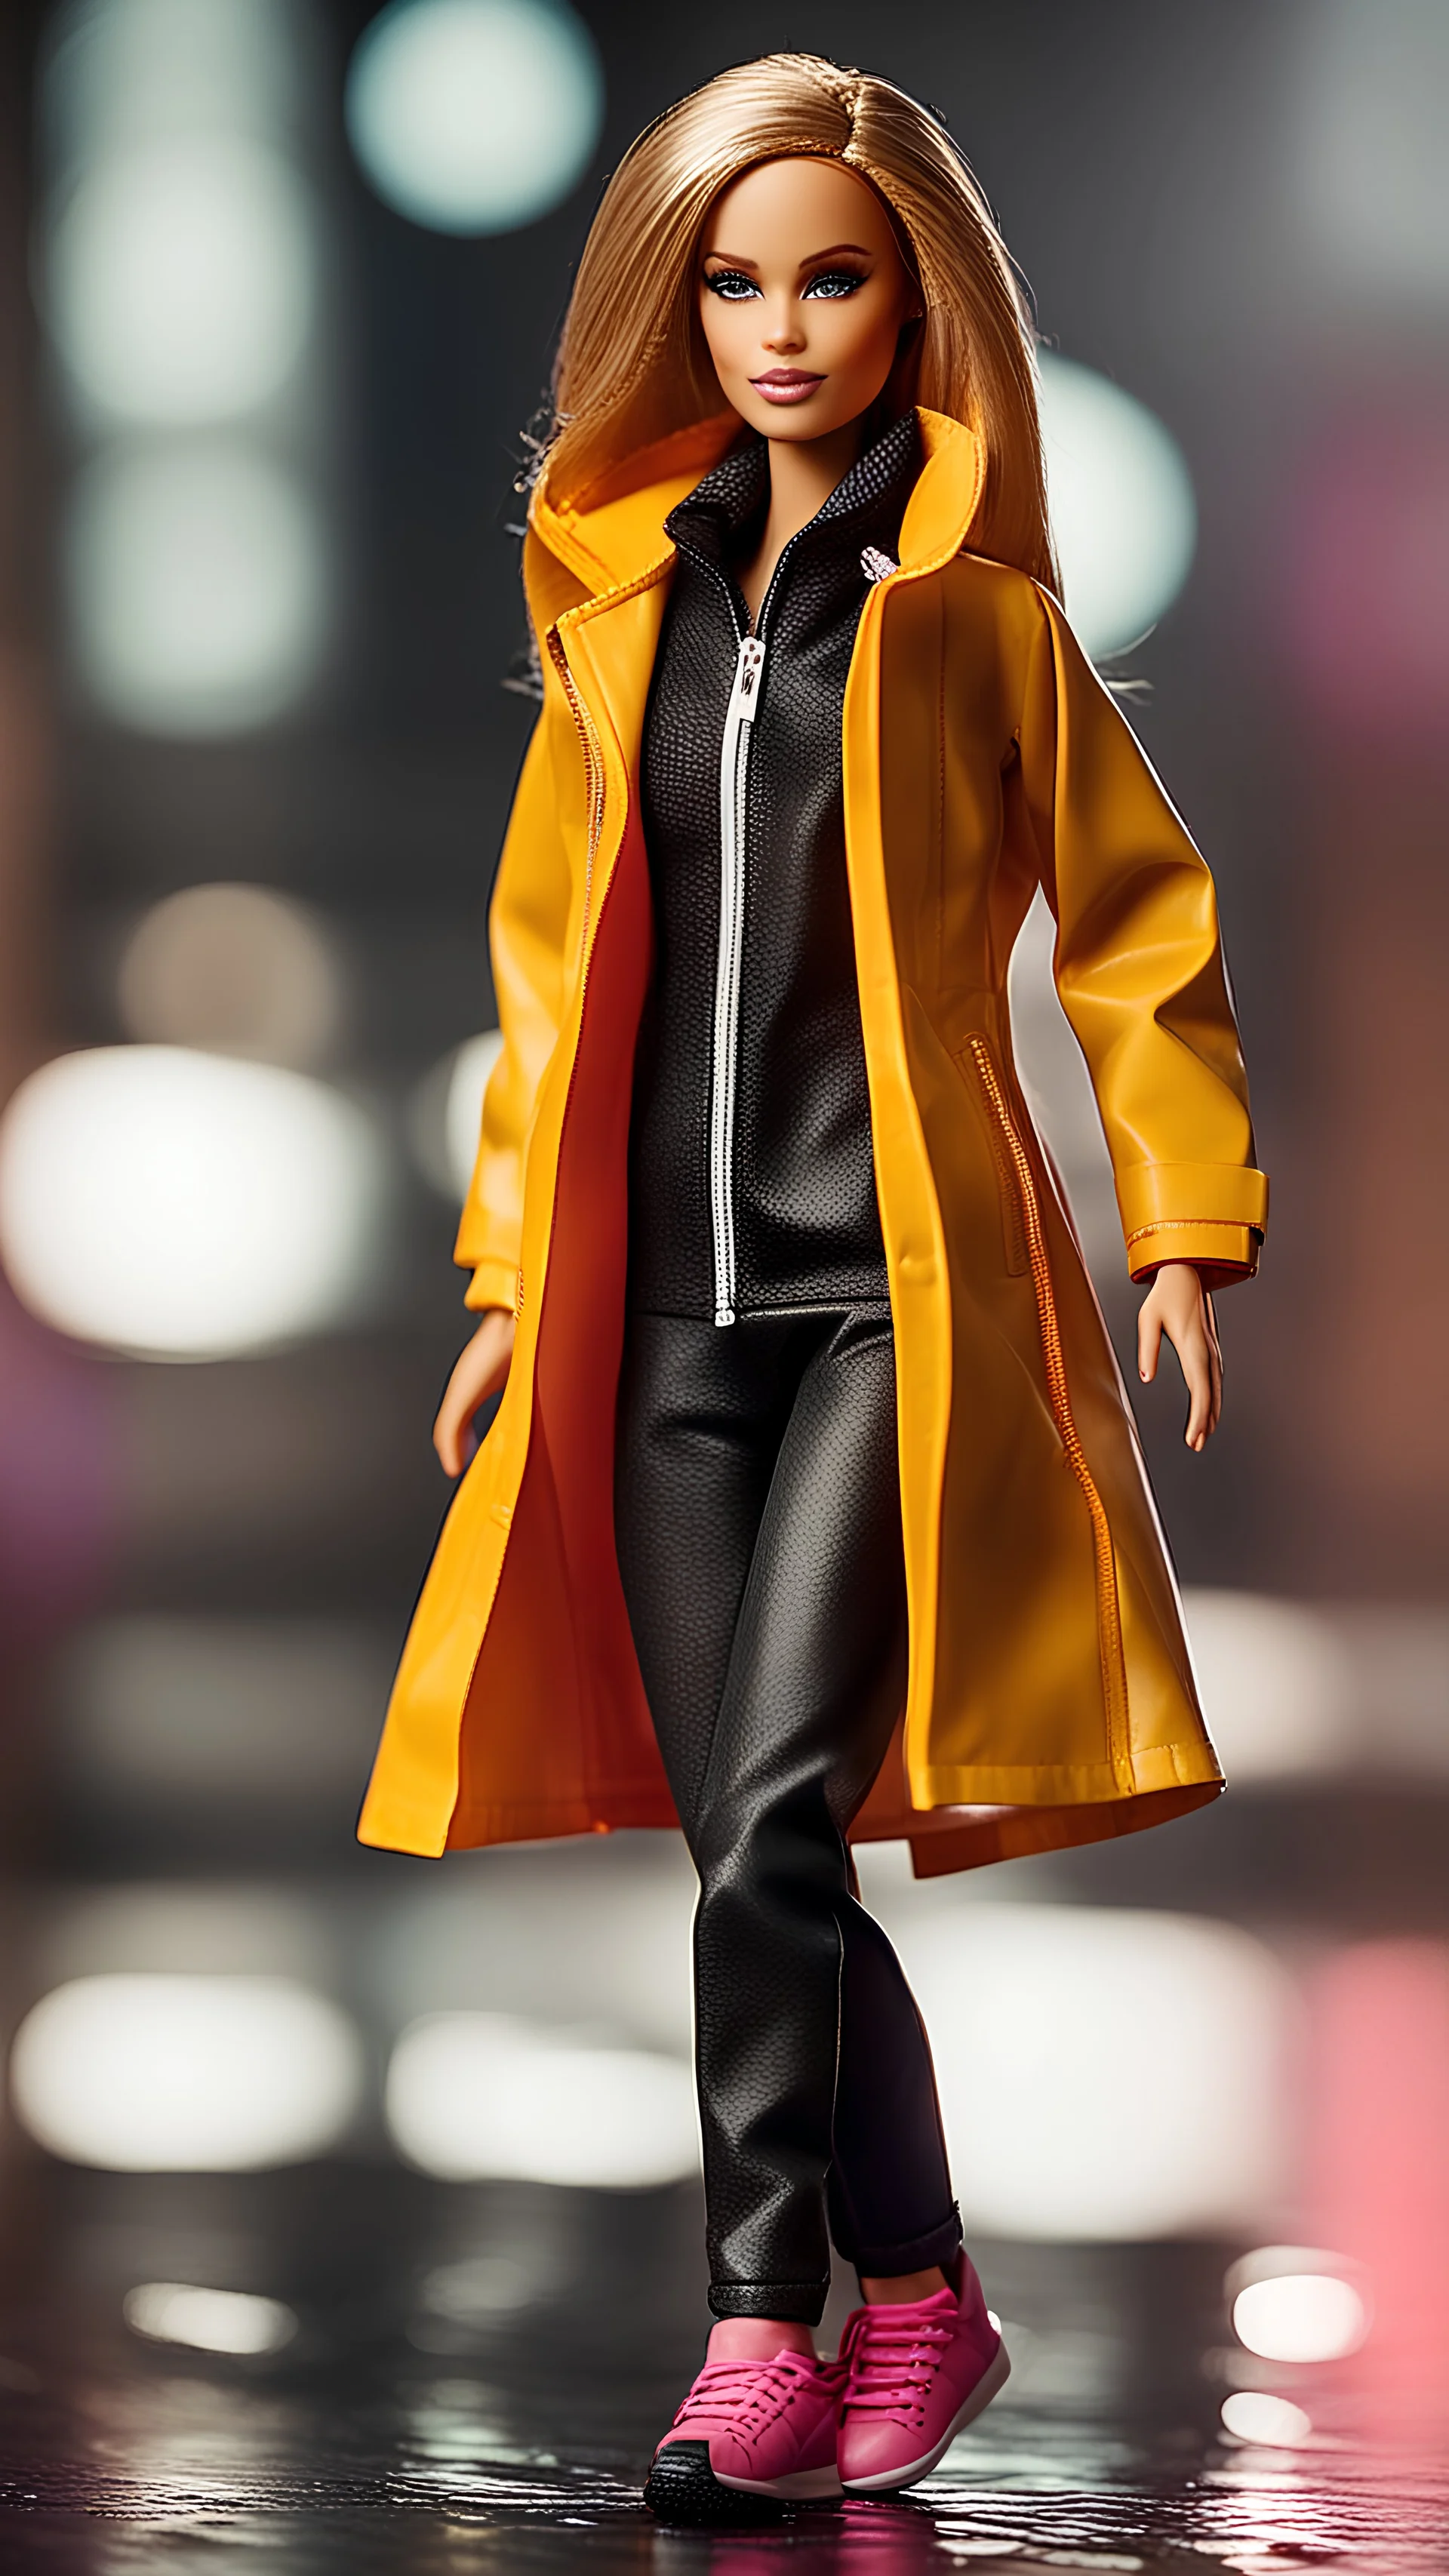 outfit ideas for one Barbie doll full grow. Weatherproof It Toughen up your sporty outfit with a long rain coat and loads of inky leather.